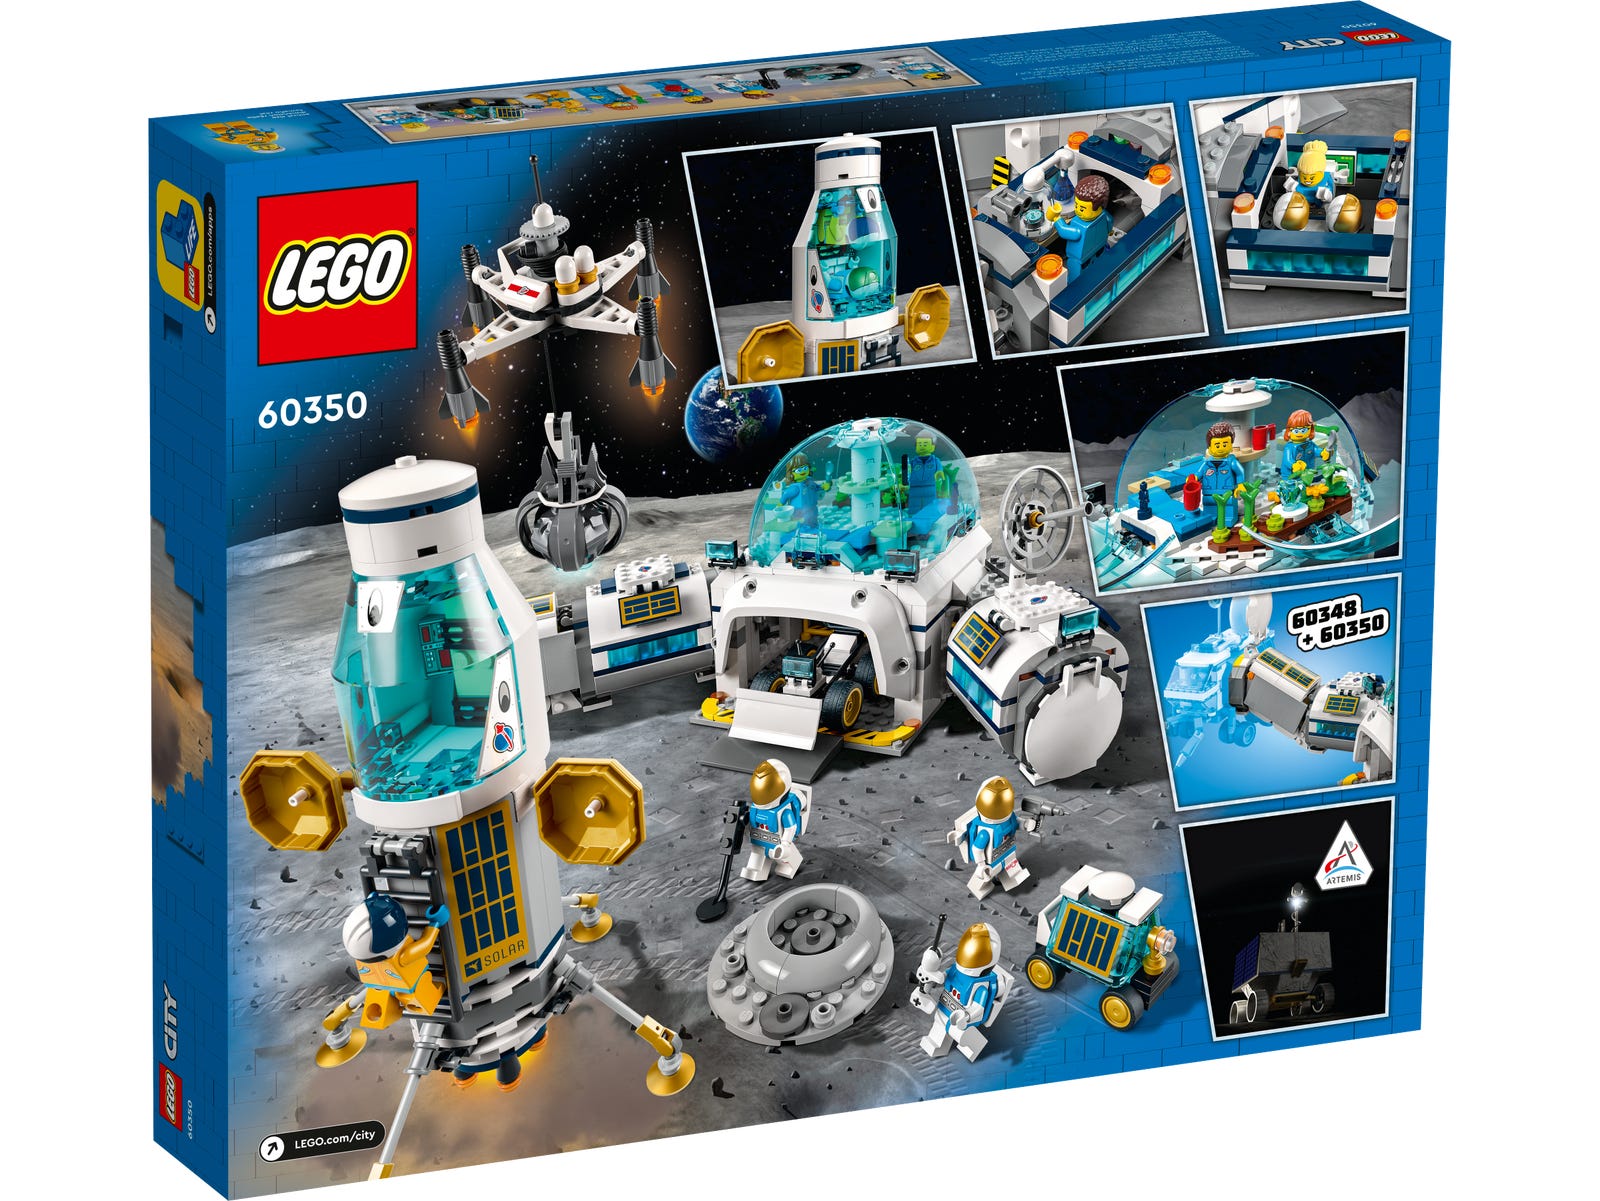 Review: 60350-1 - Lunar Research Base